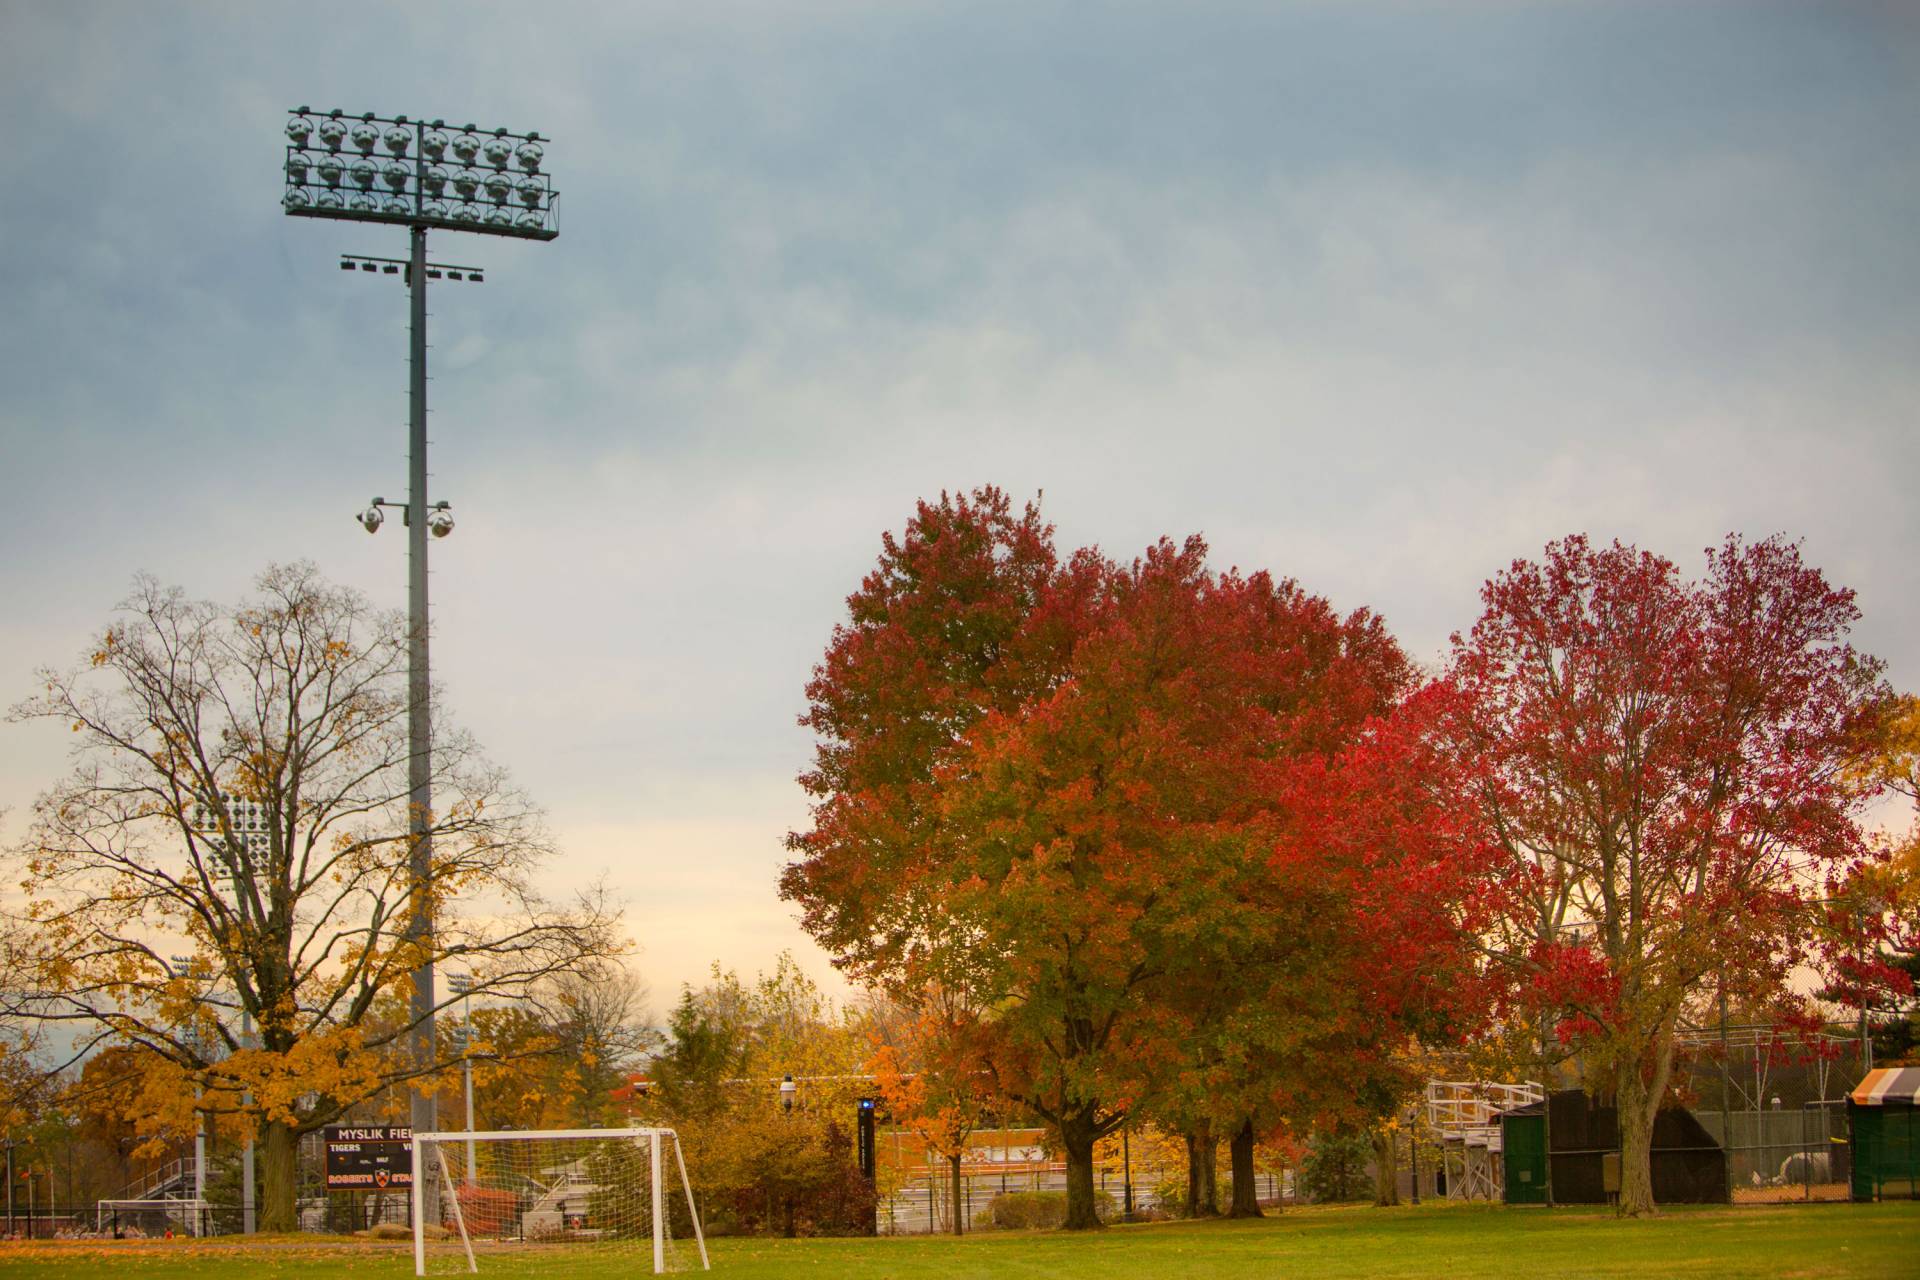 Fall foliage over the soccer pitch